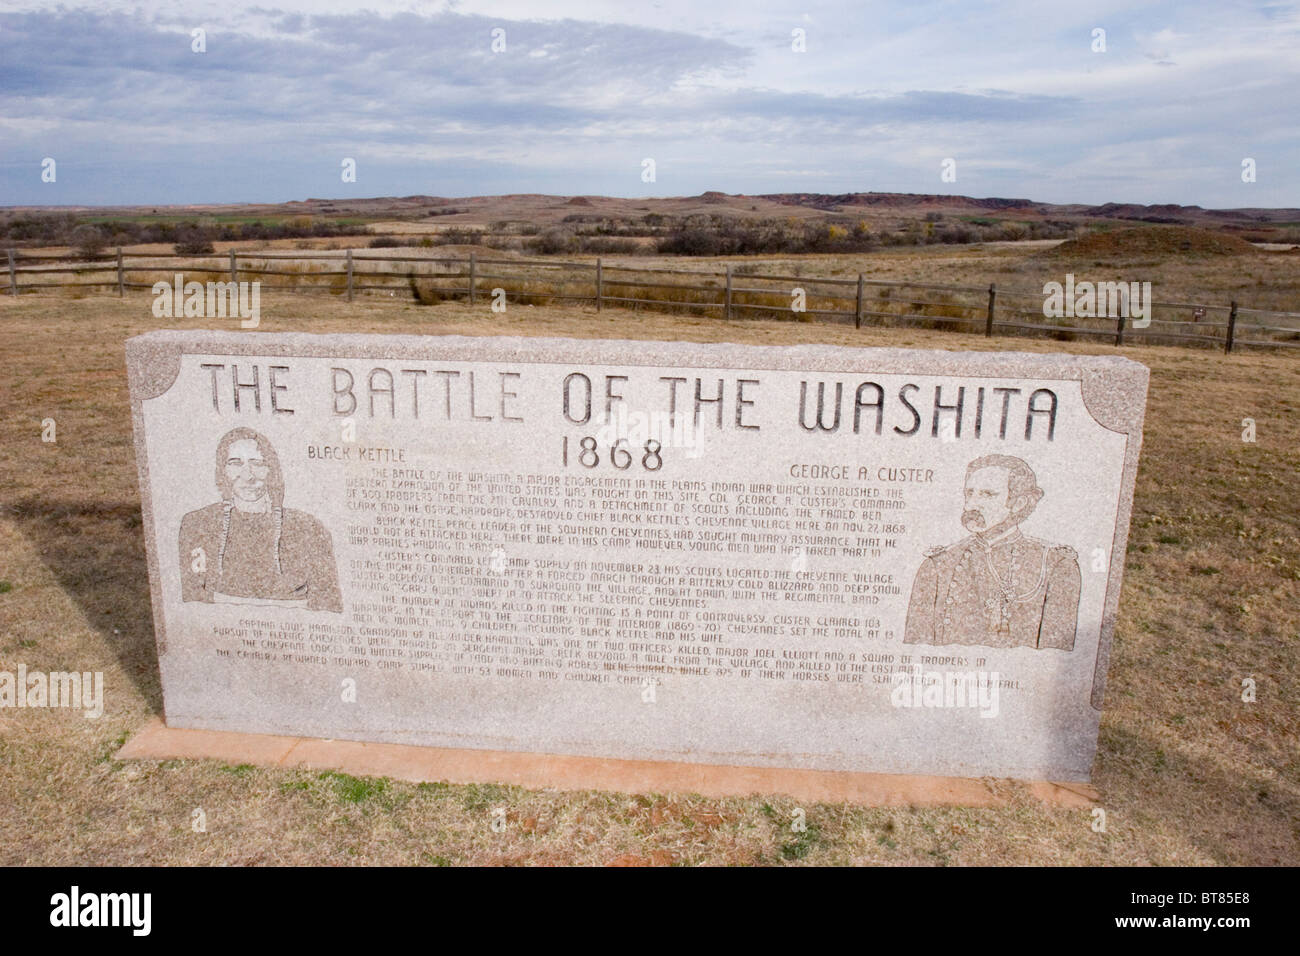 The Washita River where Chief Black Kettle and his band of Southern Cheyenne wintered in 1868 and were massacred by Custer. Stock Photo